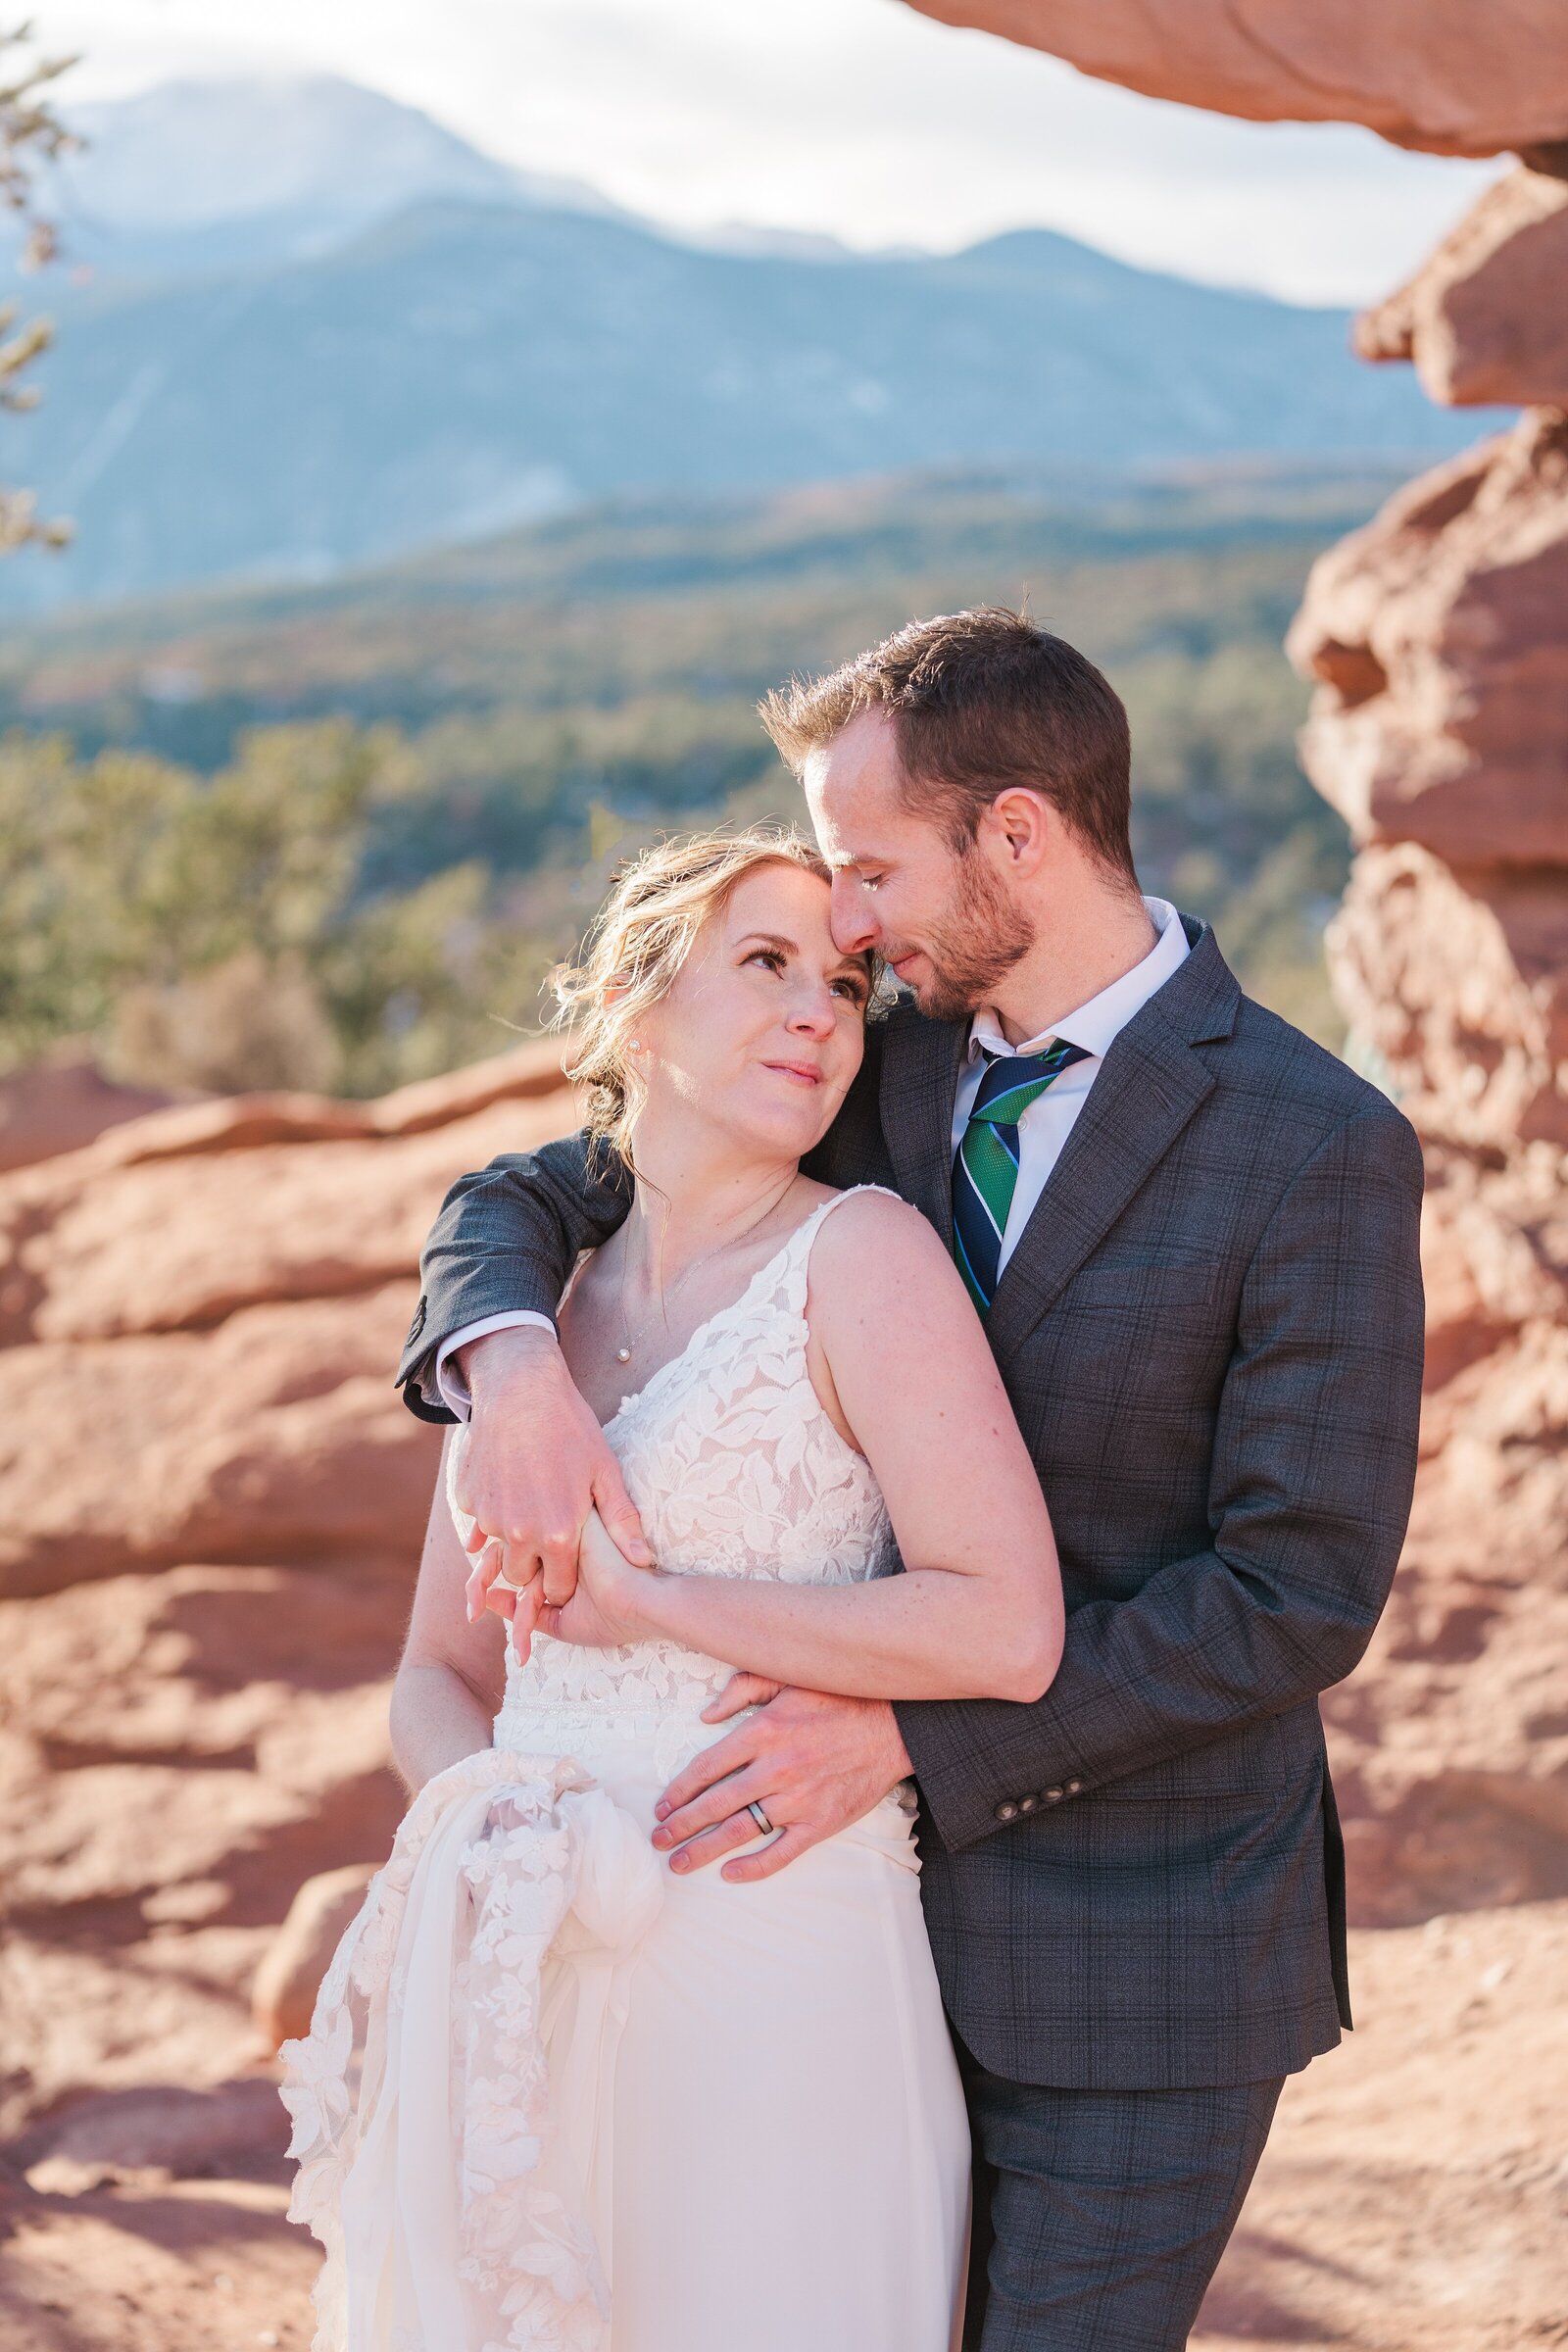 Celebrate your love with a personalized and intimate Colorado anniversary session. Samantha Immer's natural light photography and candid approach will capture the essence of your relationship and create lasting memories.